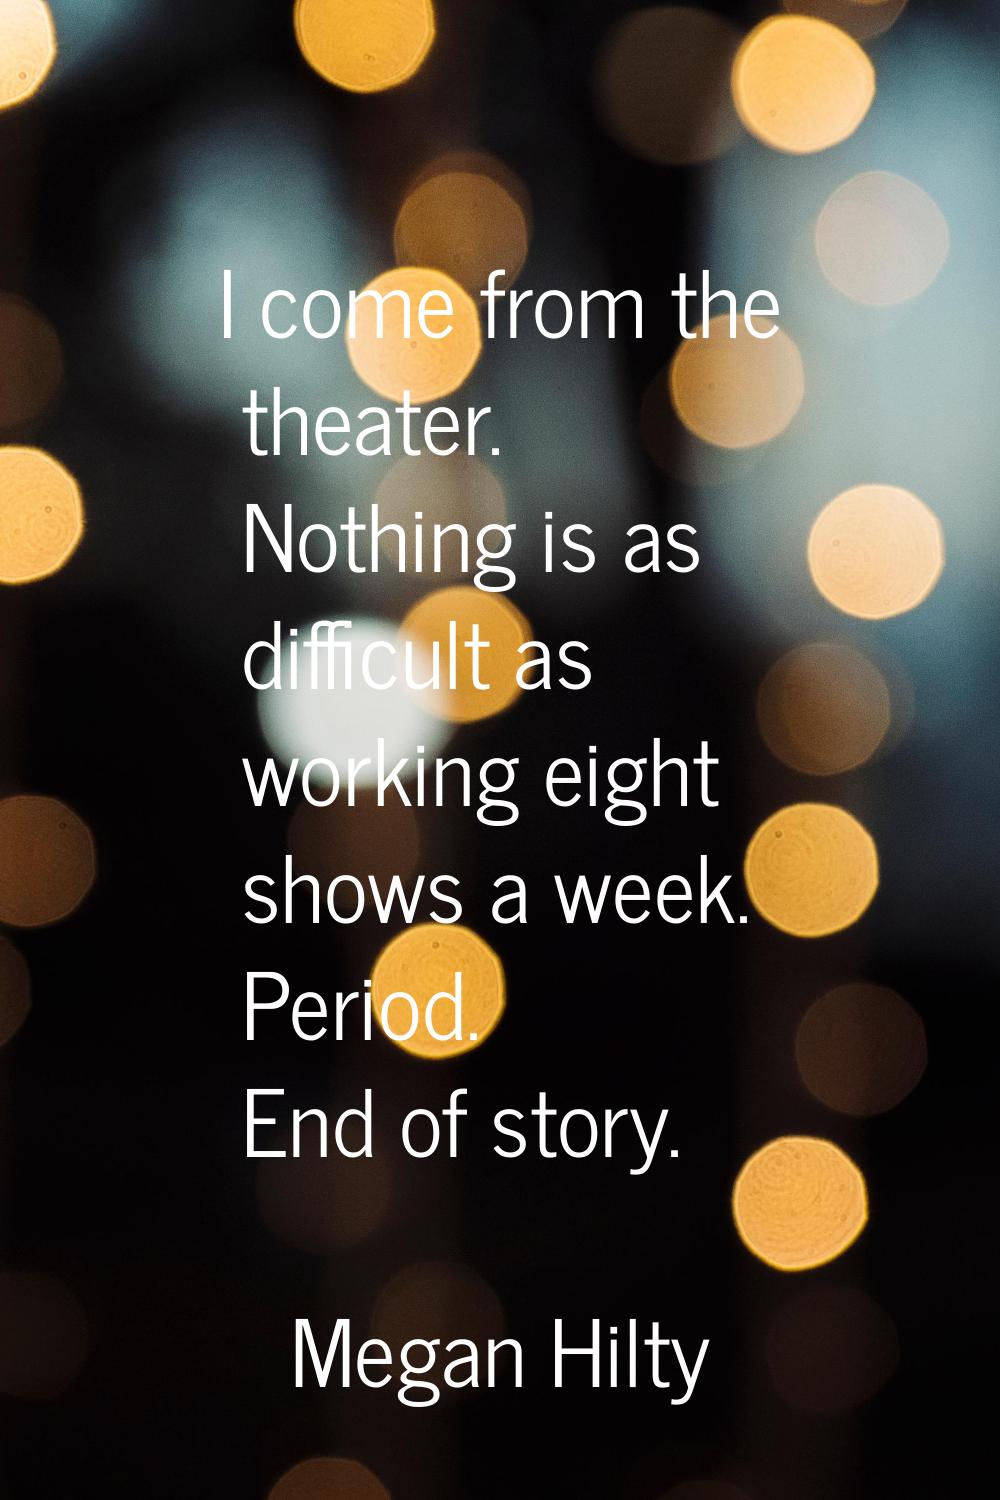 I come from the theater. Nothing is as difficult as working eight shows a week. Period. End of stor